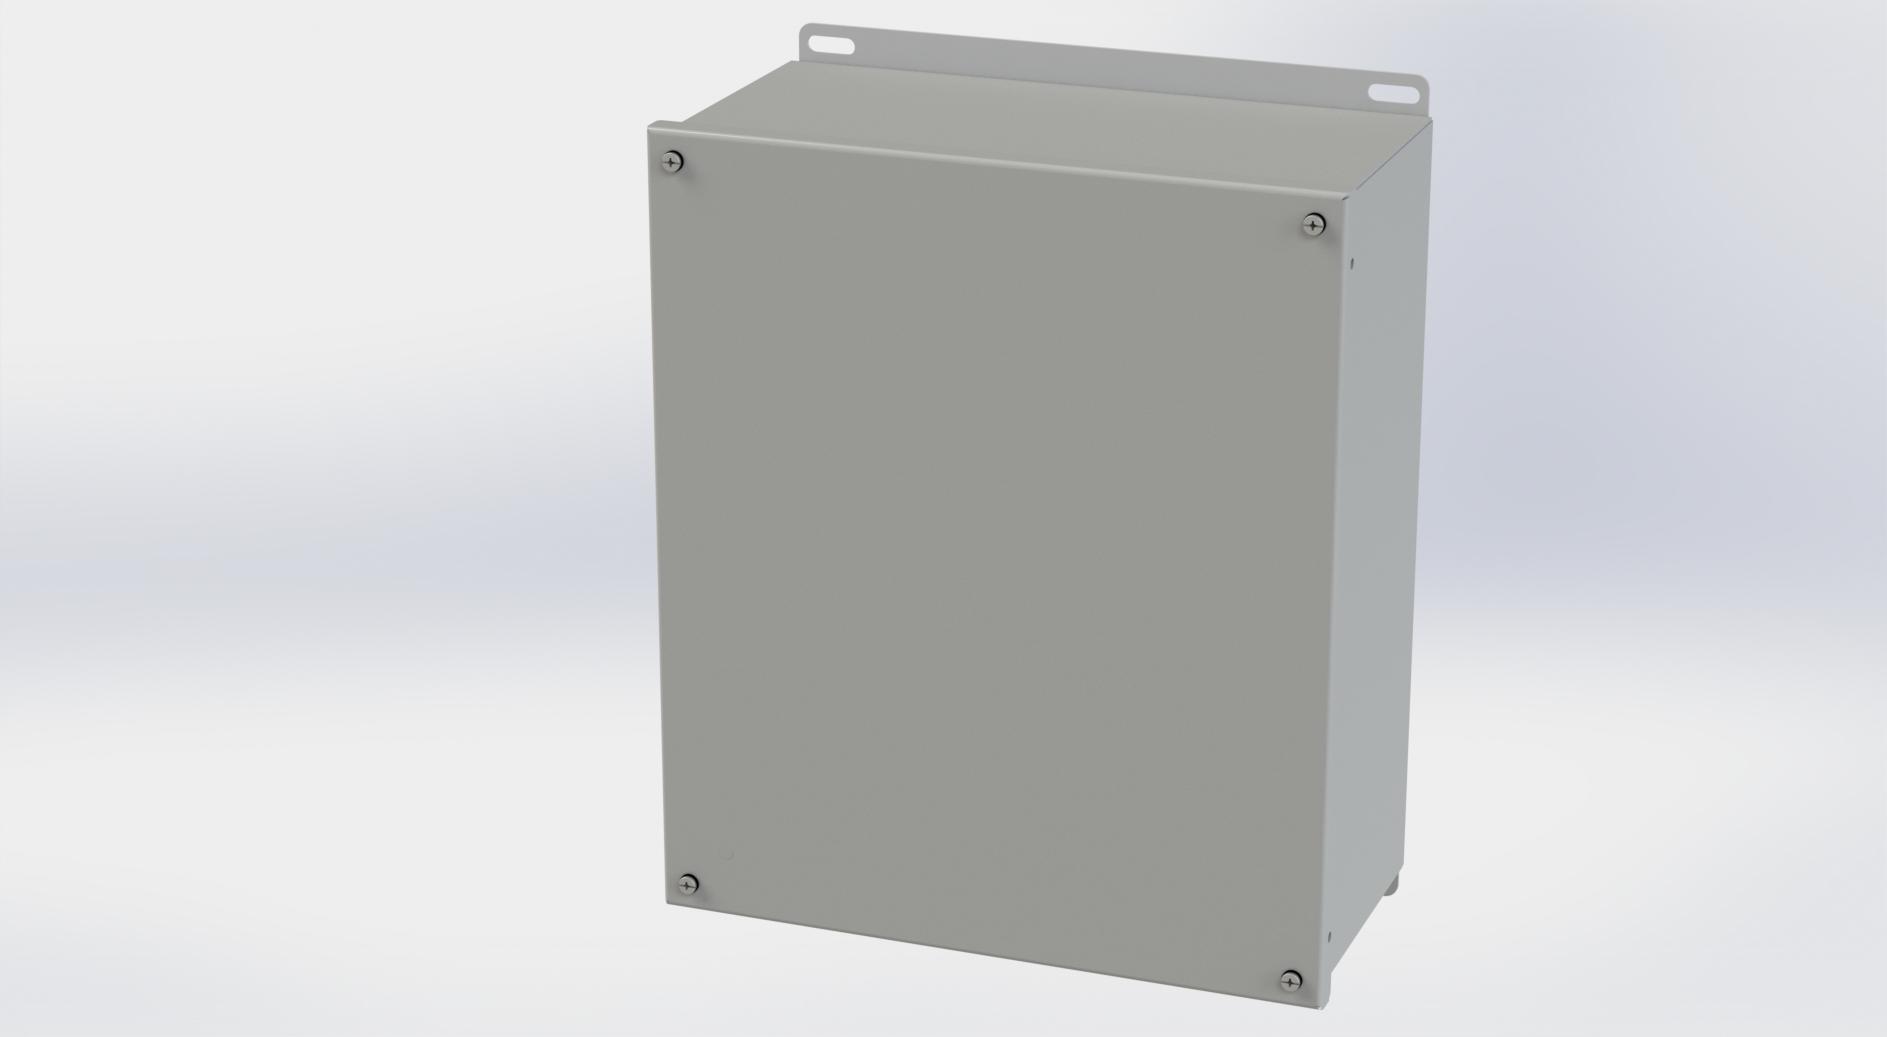 Saginaw Control SCE-1412SC SC Enclosure, Height:14.13", Width:12.00", Depth:6.00", ANSI-61 gray powder coating inside and out.  Optional sub-panels are powder coated white.